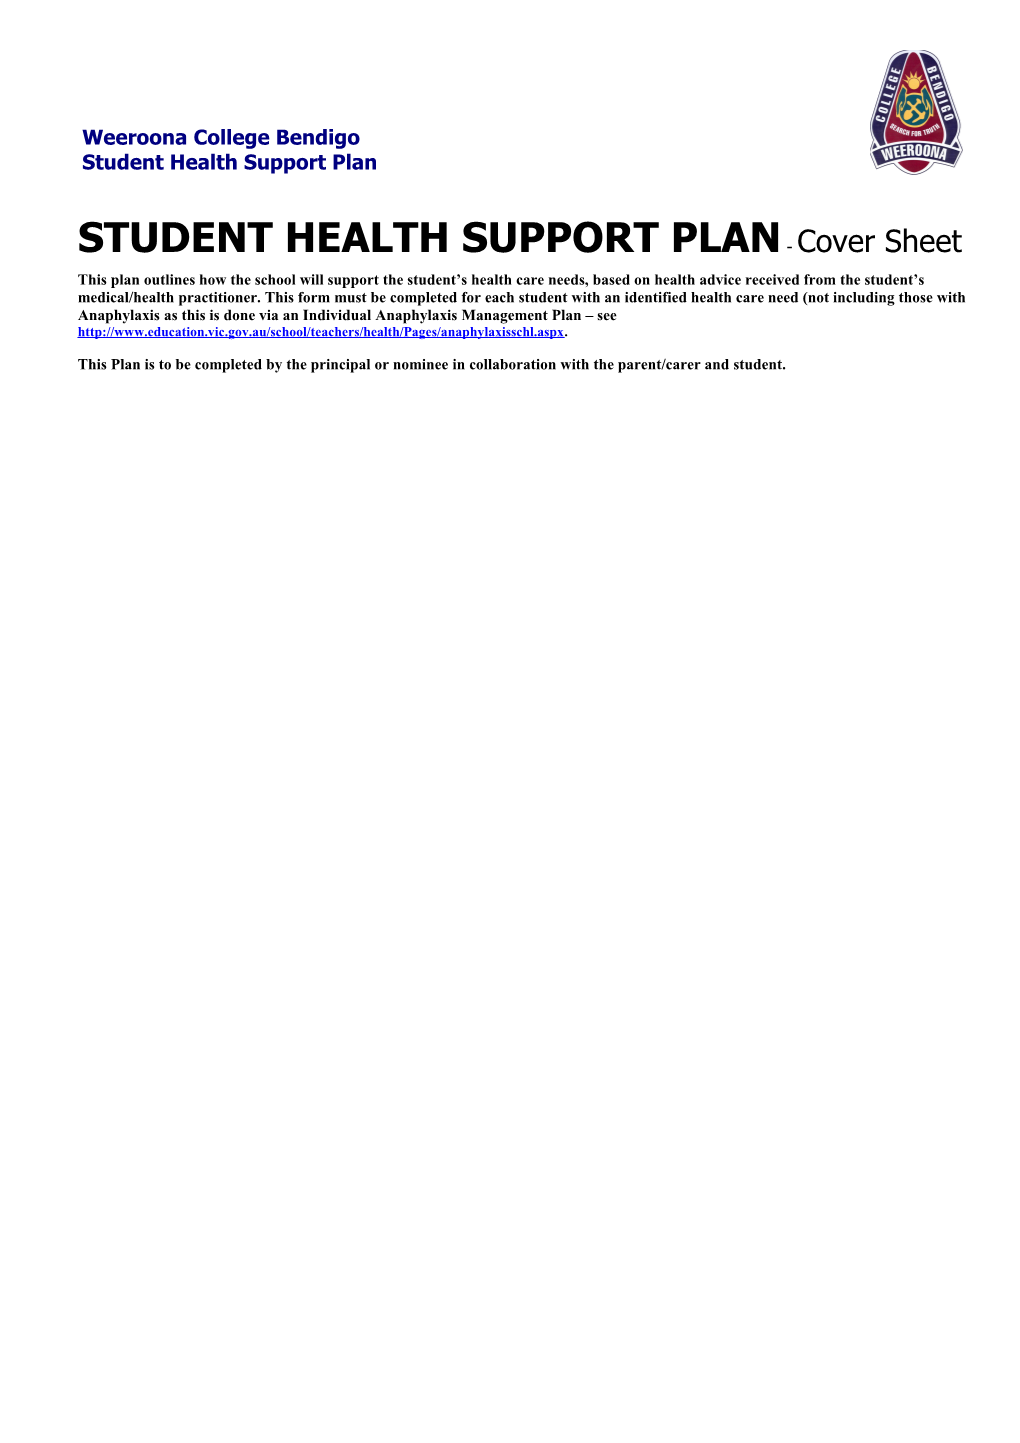 Student Health Support Plan